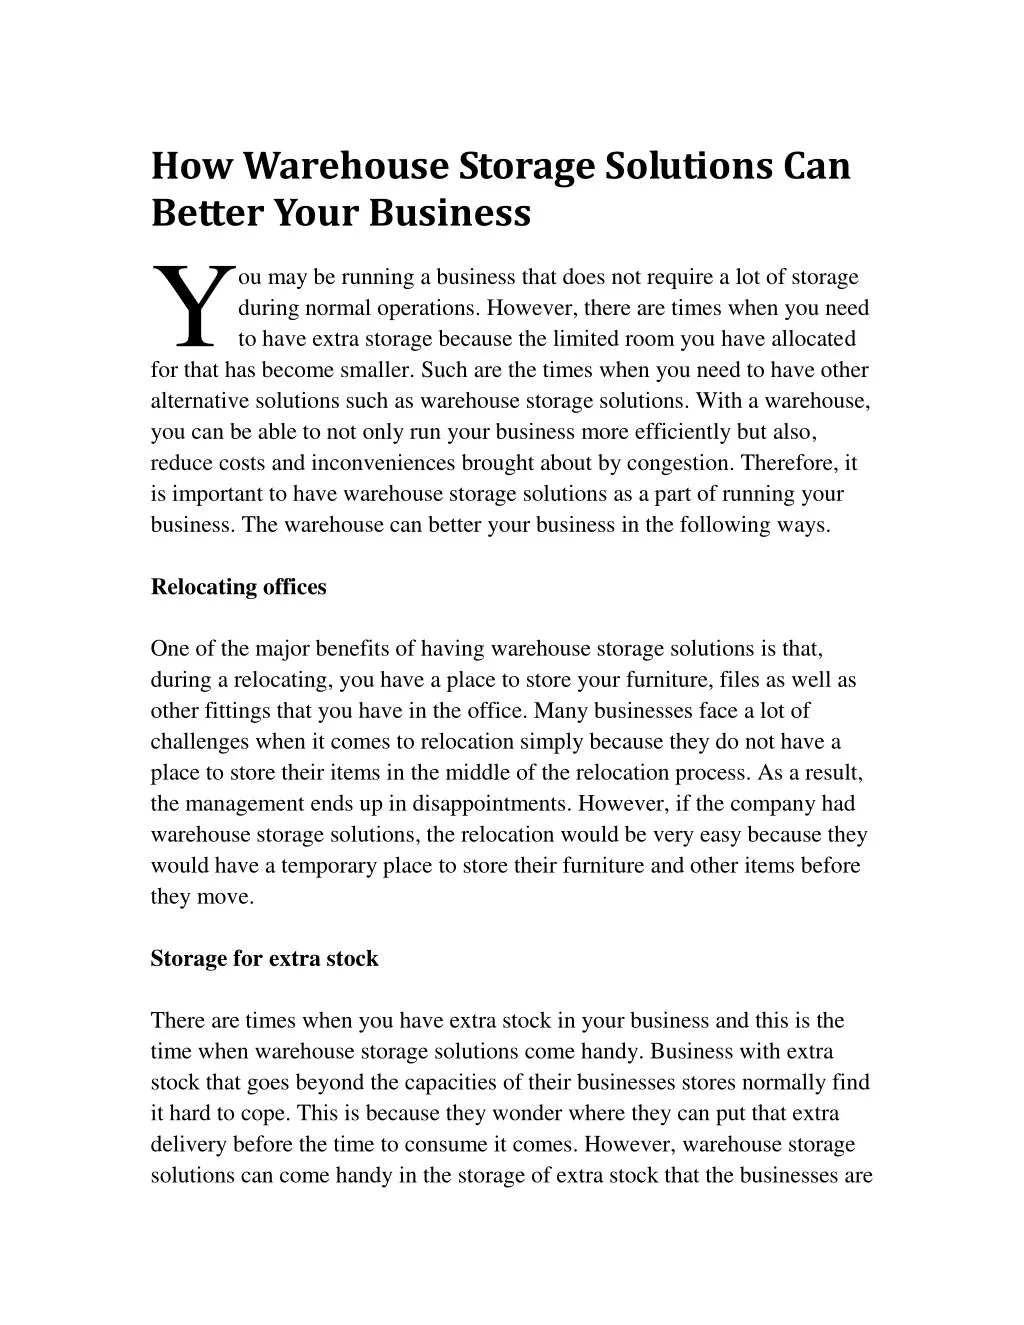 how warehouse storage solutions can better your